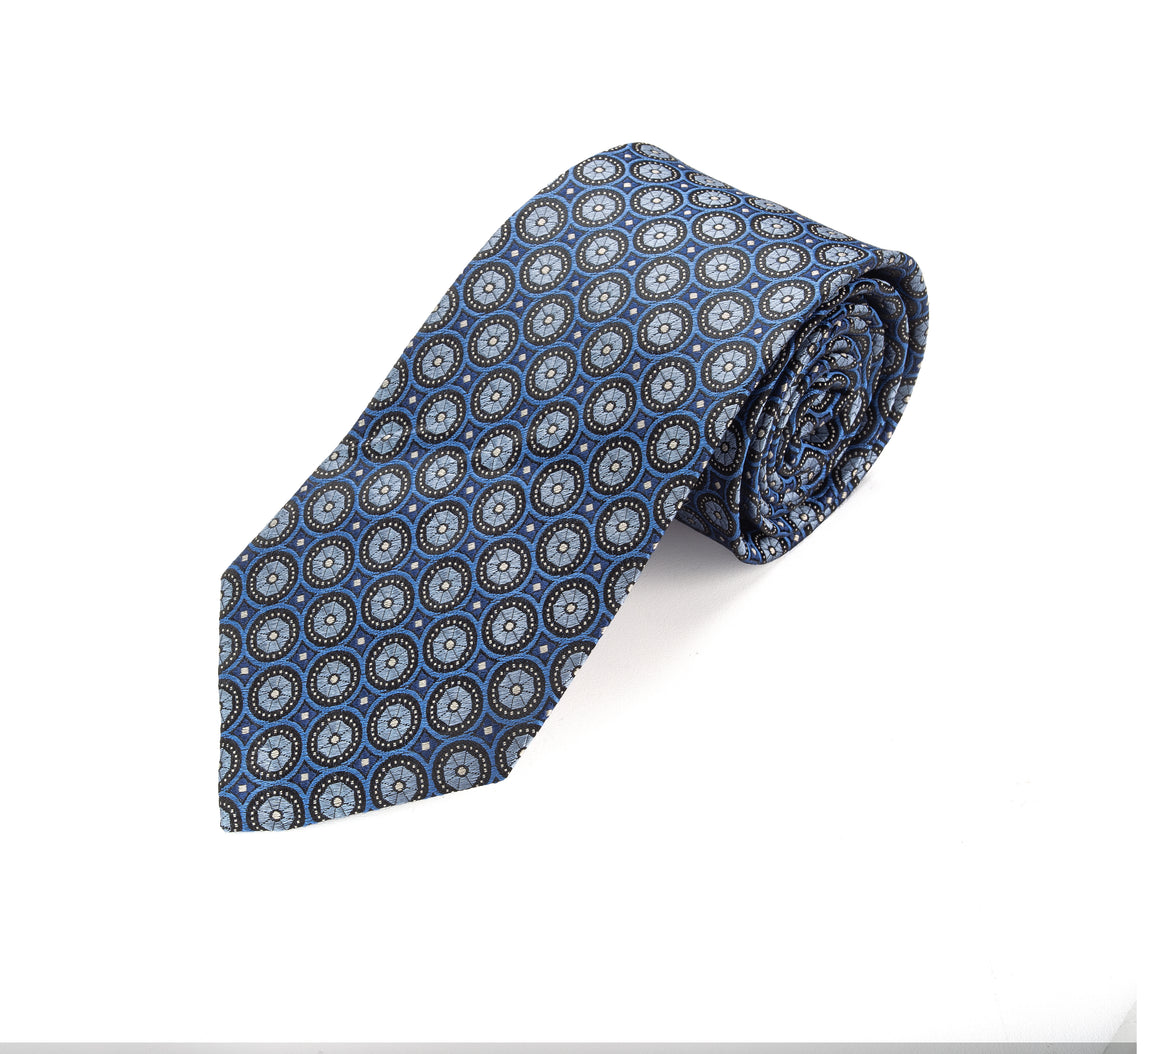 Achieve perfection in your business attire with this versatile tie | 1782